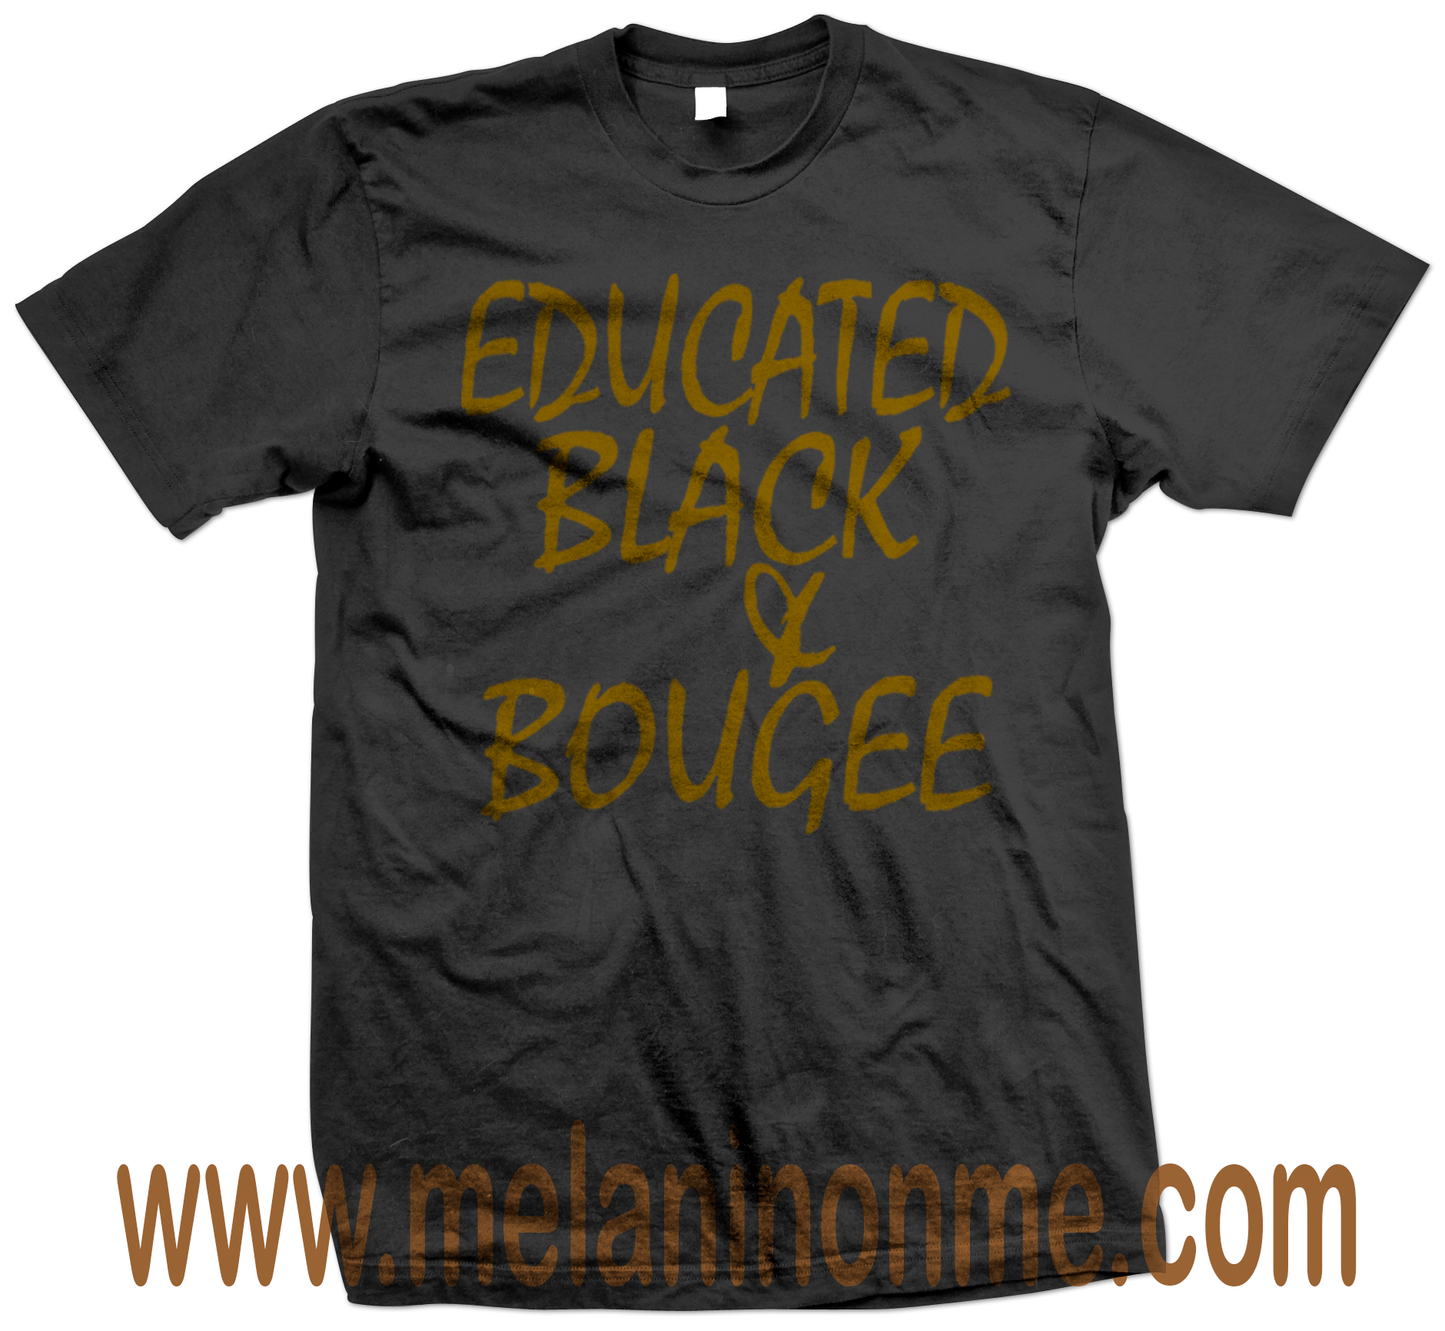 Educated Black and Bougee Tshirt - Unisex